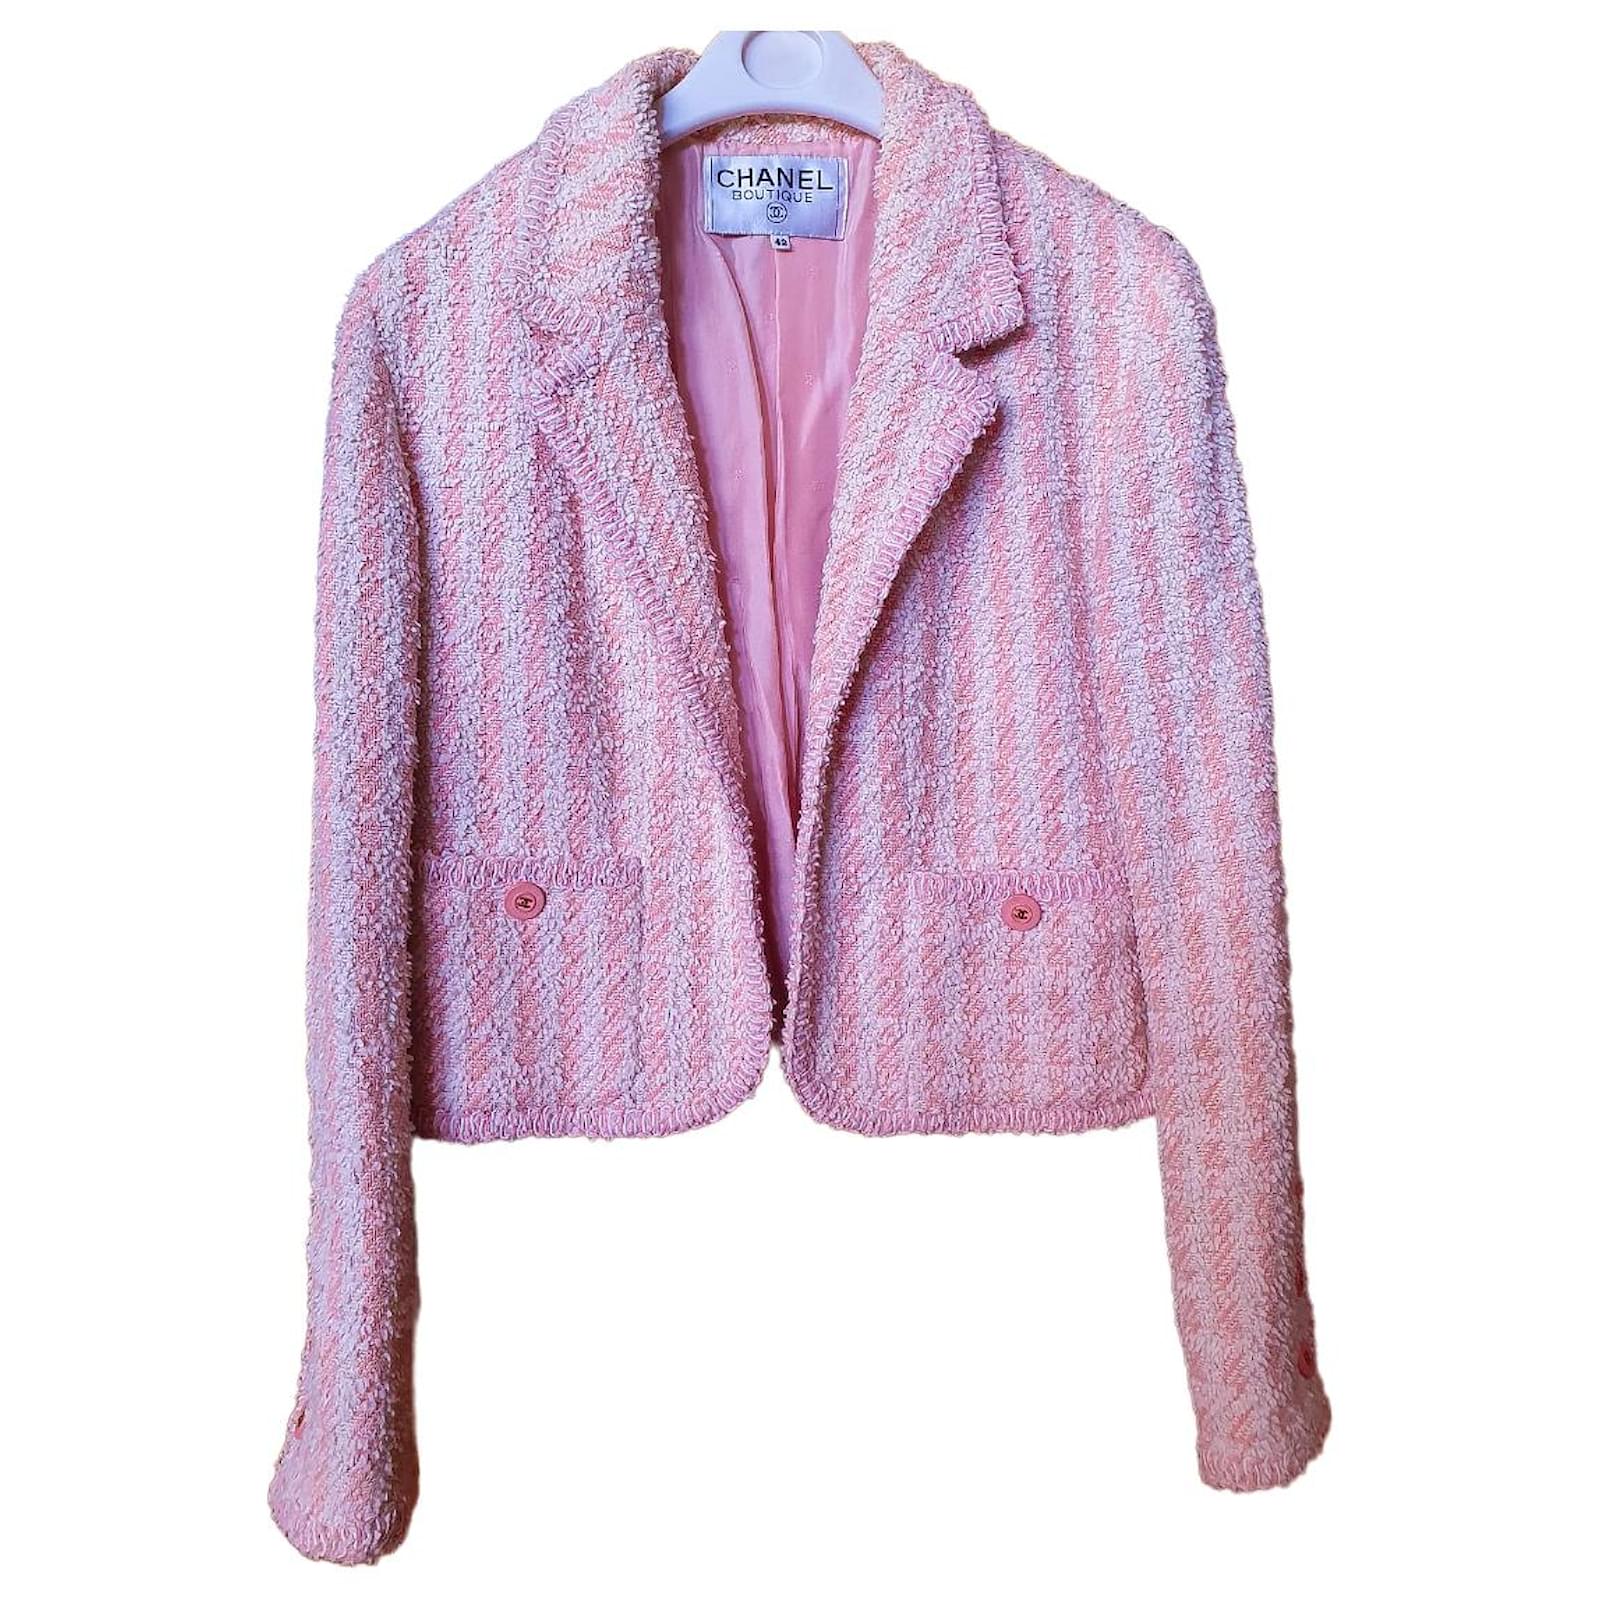 80s Chanel Print Bomber Jacket  Lucky Vintage